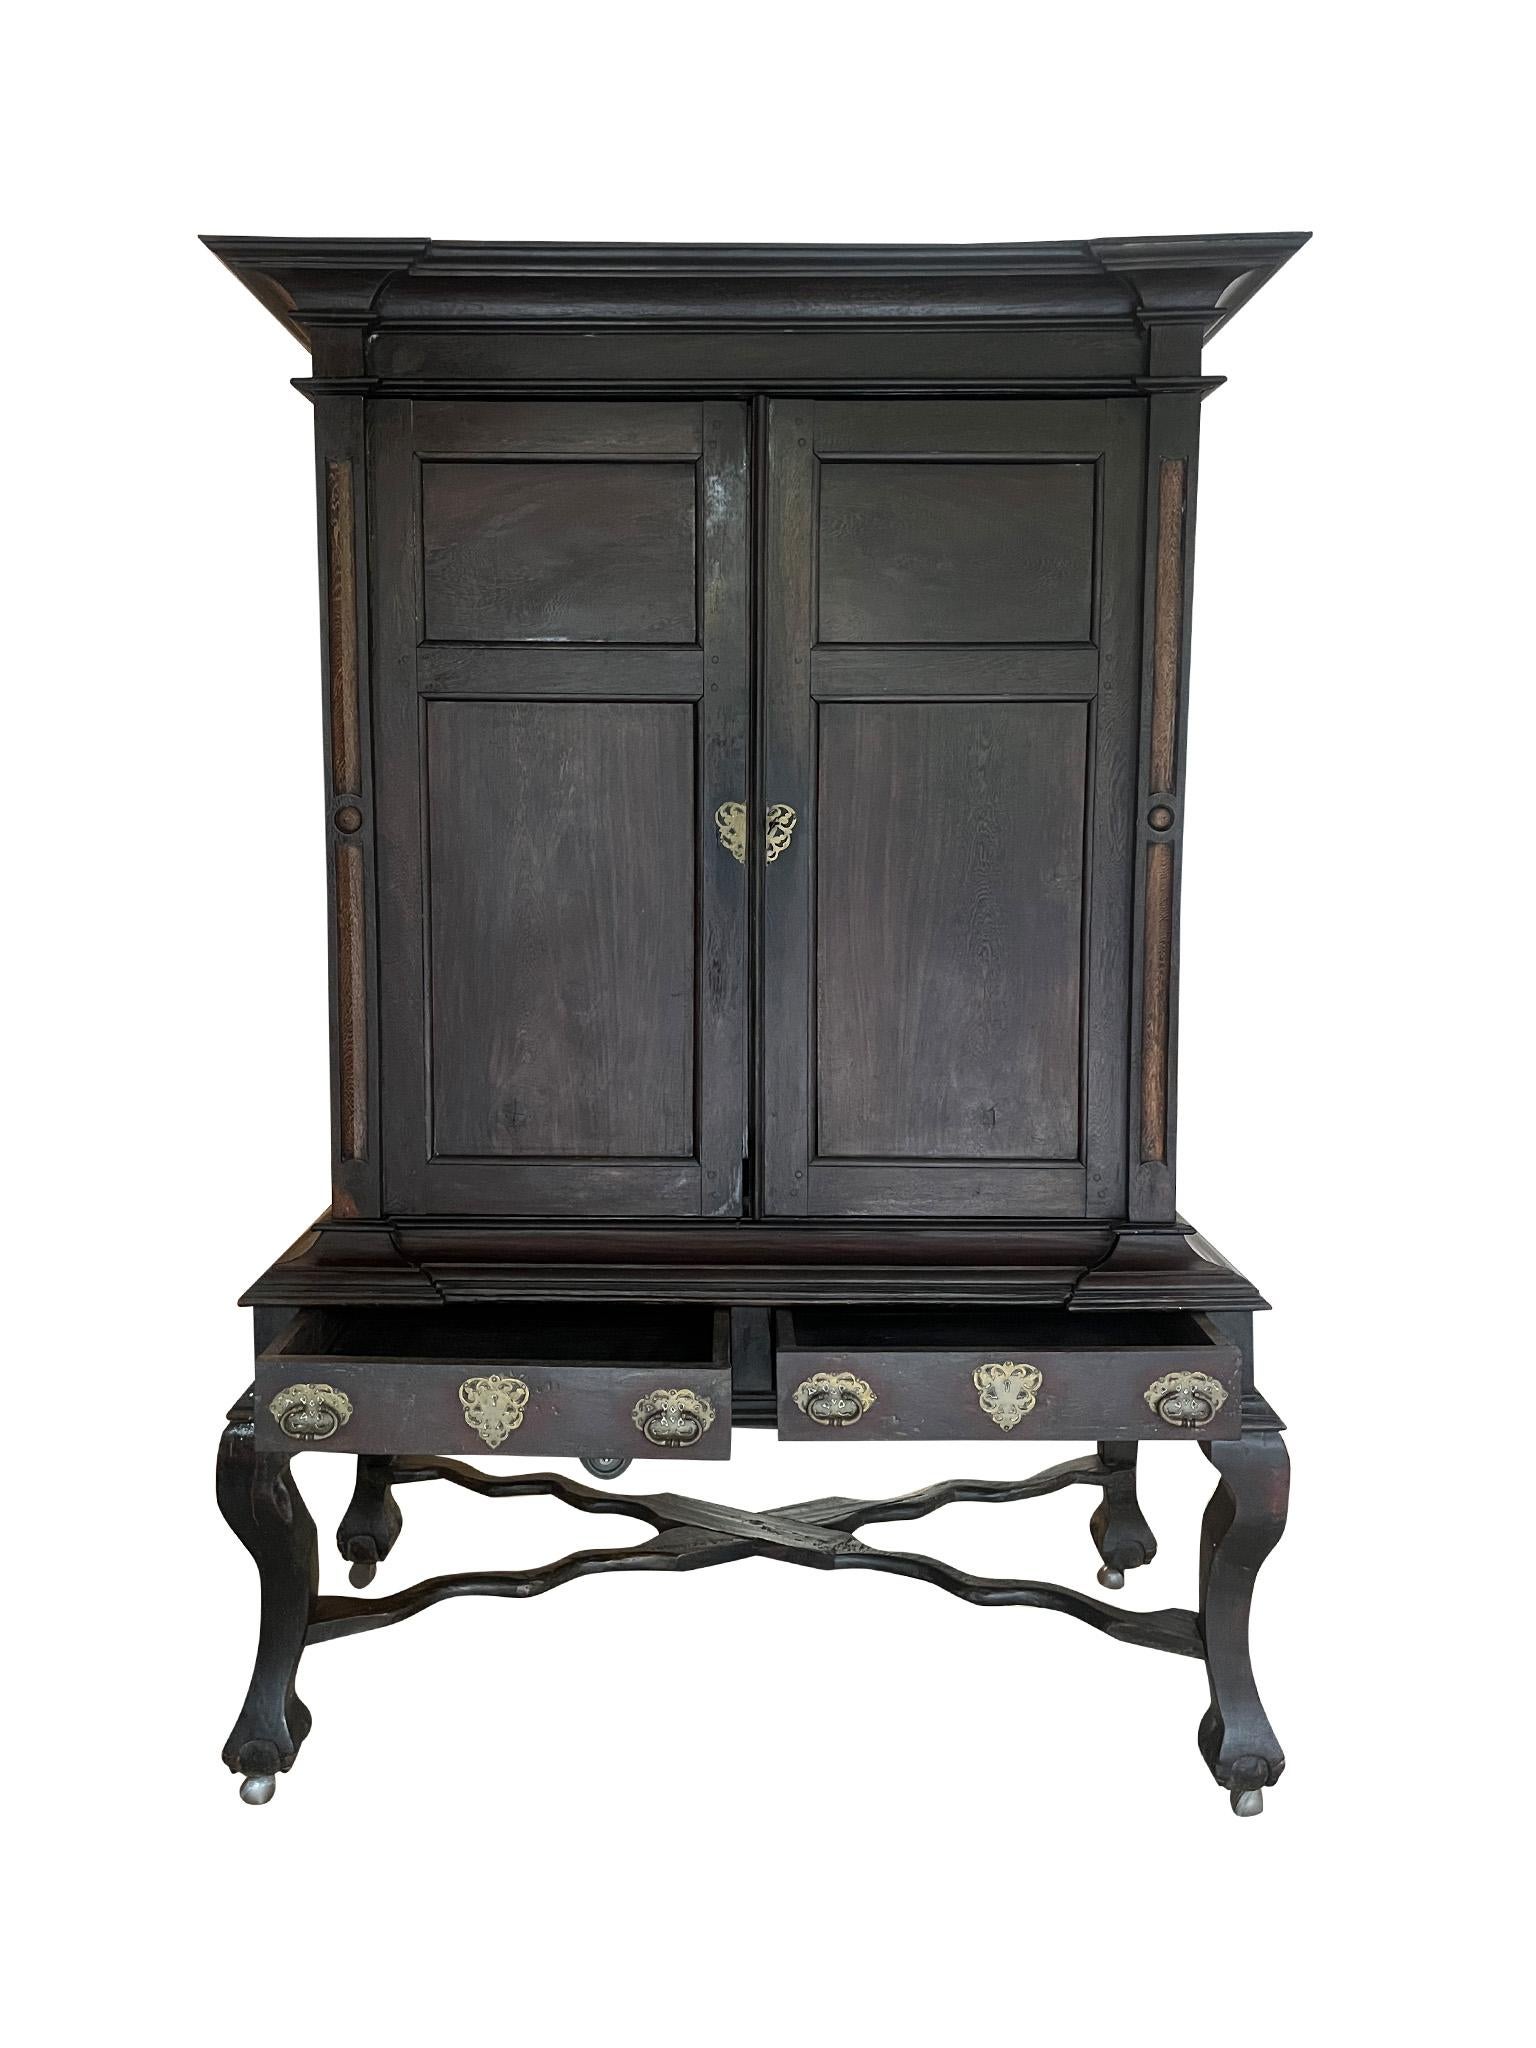 Fantastic and unusual Antique Dark Oak Linen Cabinet. Constructed during the late 17th century, this linen cabinet was built in solid oak and comprised of two pieces. The bottom components design features a wavy x-base stretcher, two storage